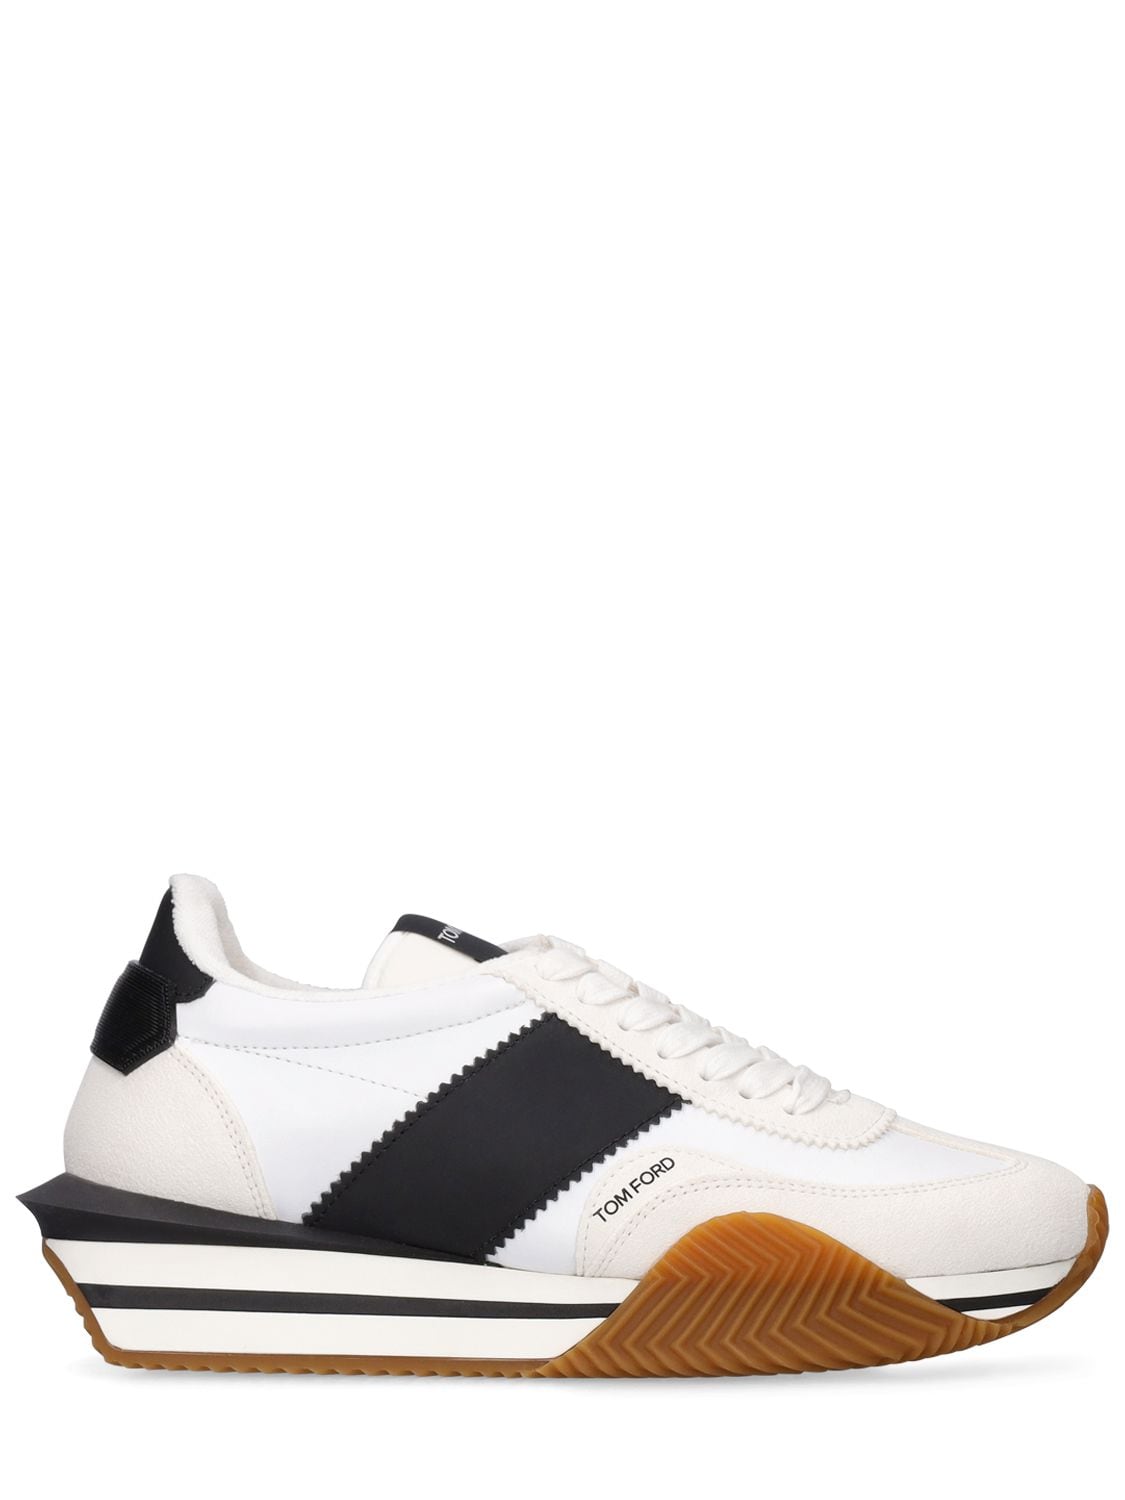 Tom Ford Men's Two-toned Low-top Sneakers In White Black Cream